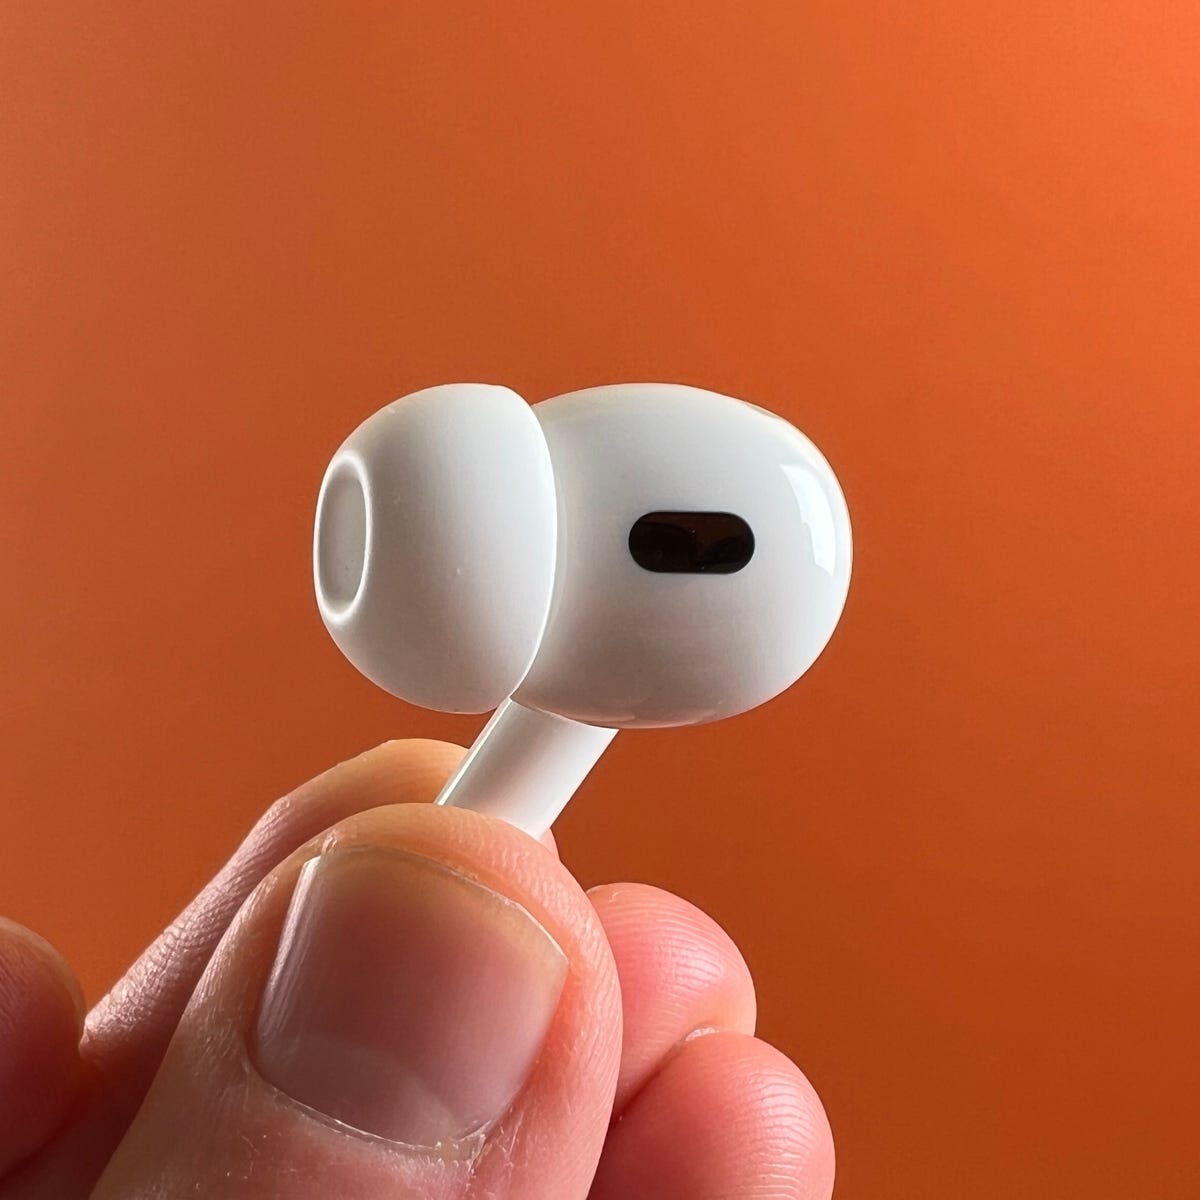 Apple AirPods Pro 2 Review: The Best Lightweight Earbuds You Can Buy - CNET